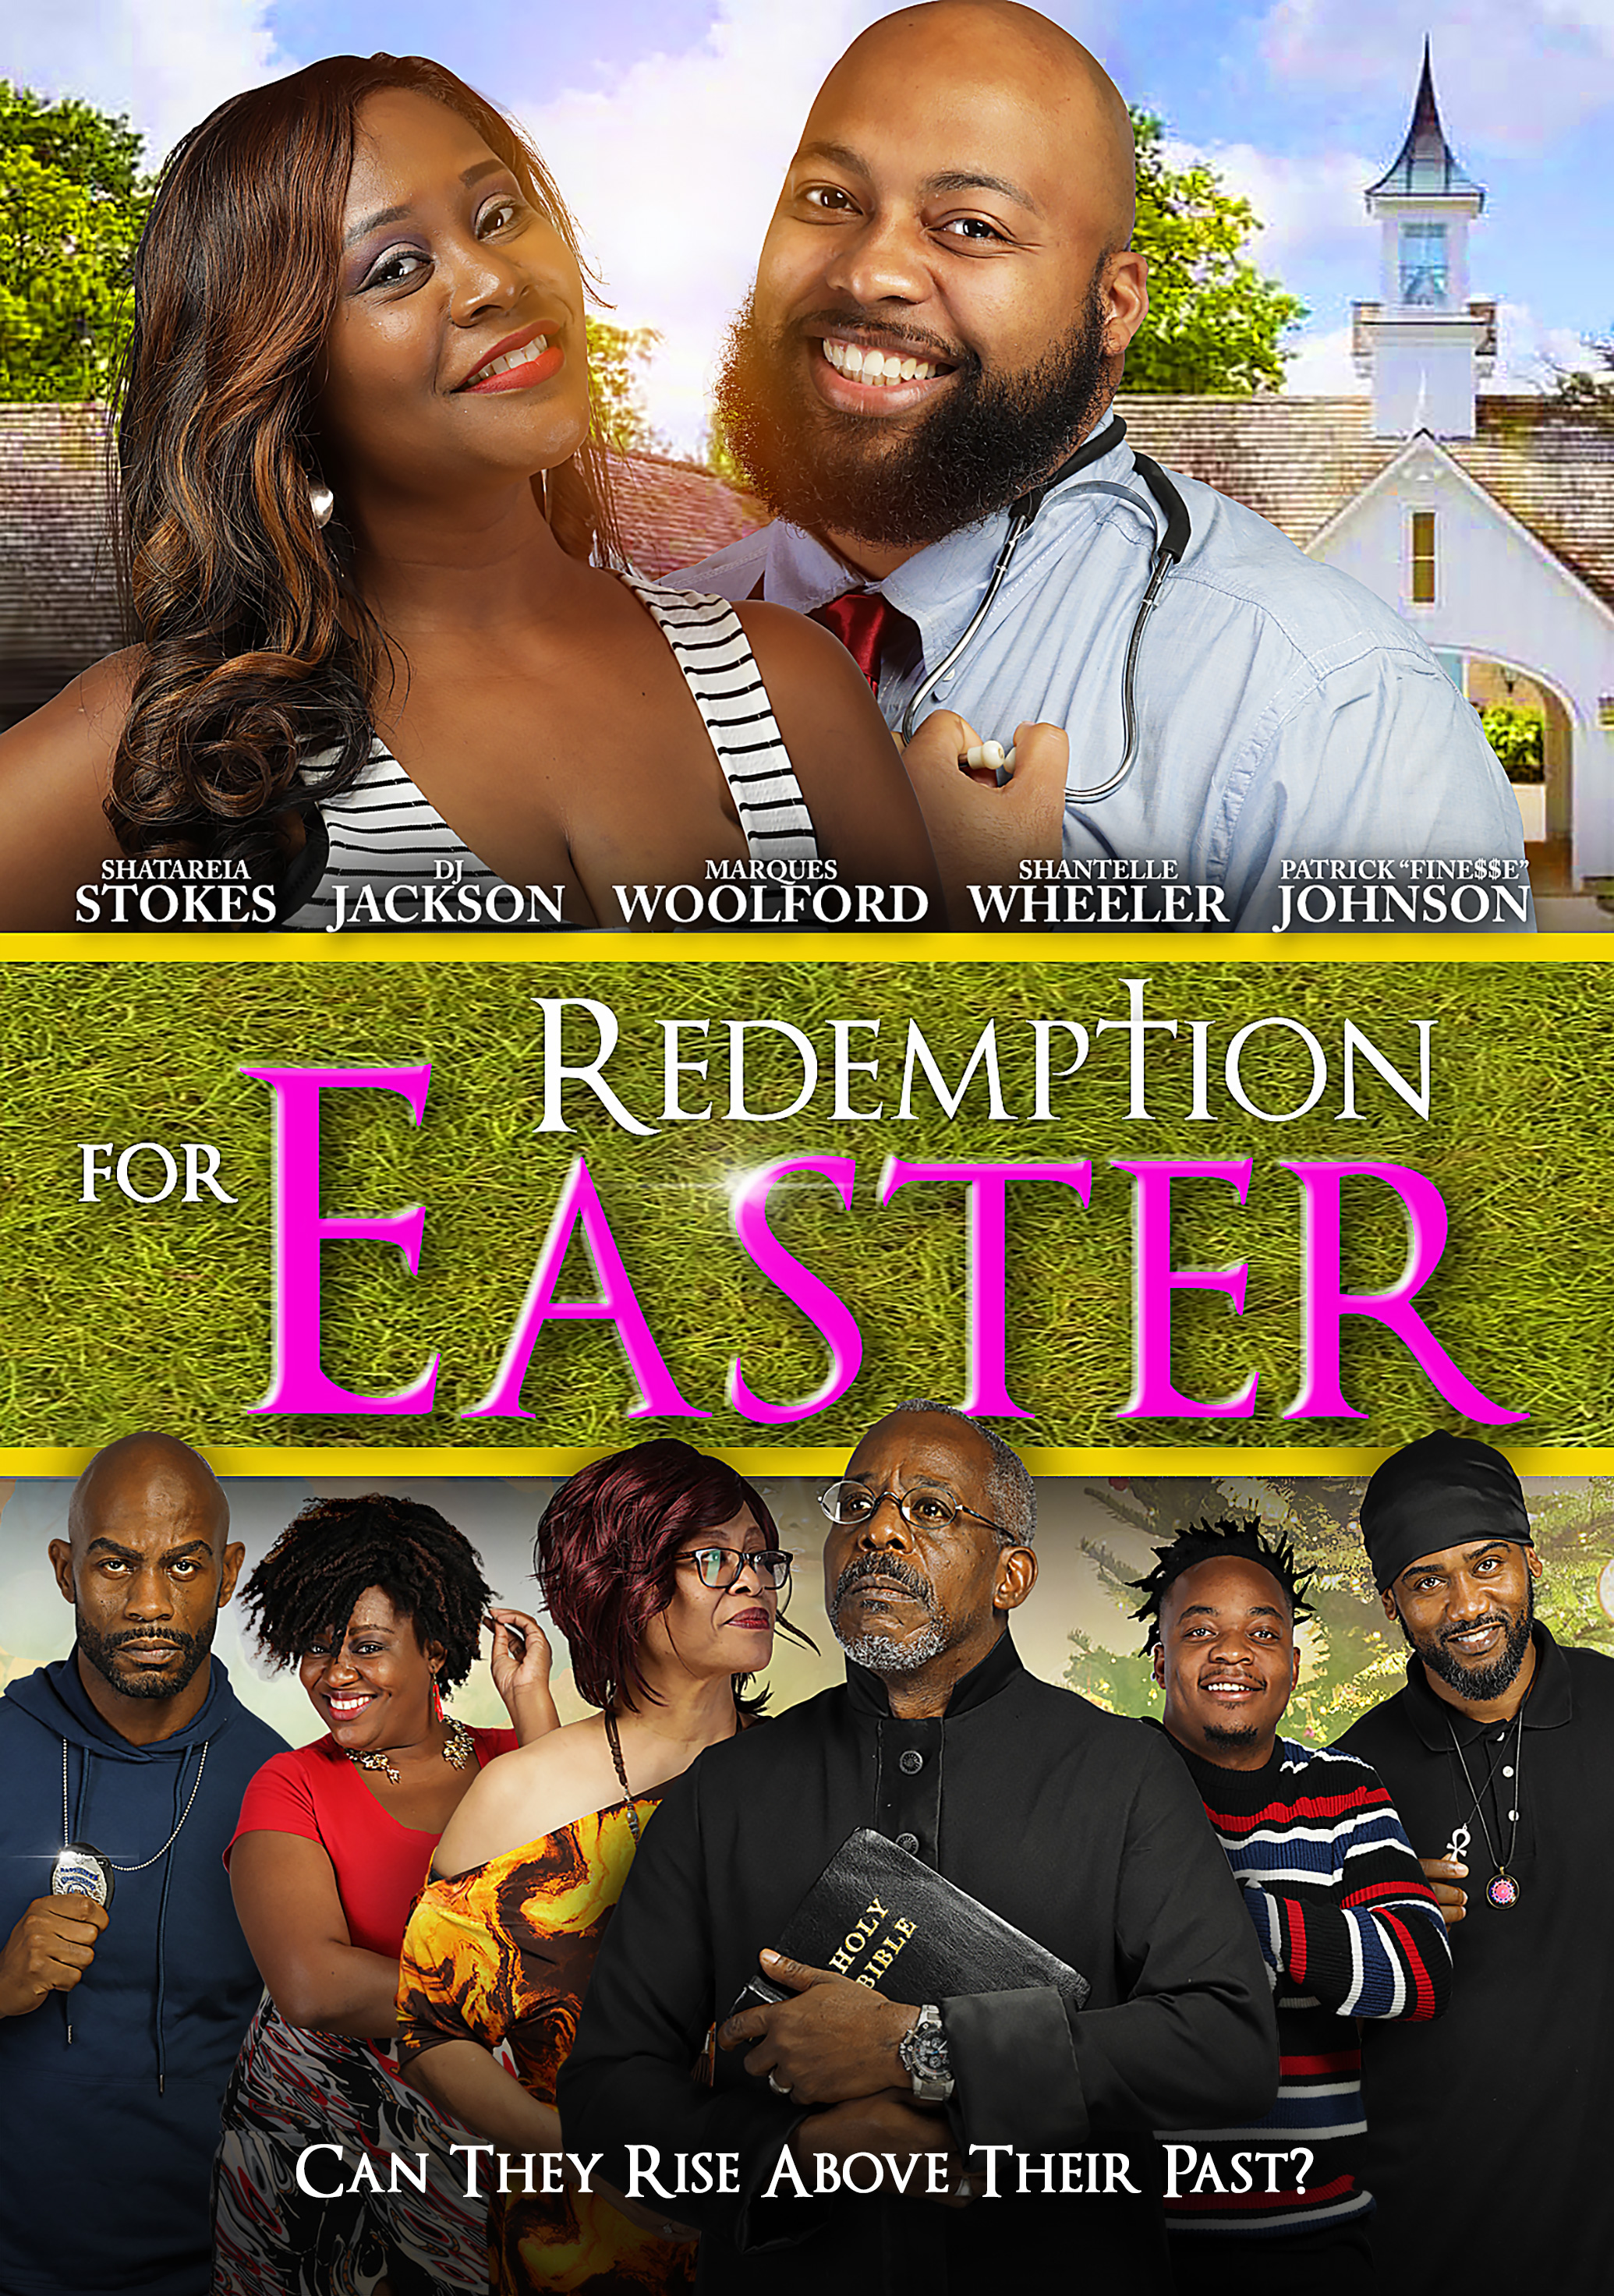 Redemption for Easter (2020) Drama, Directed By Karlton T photo photo